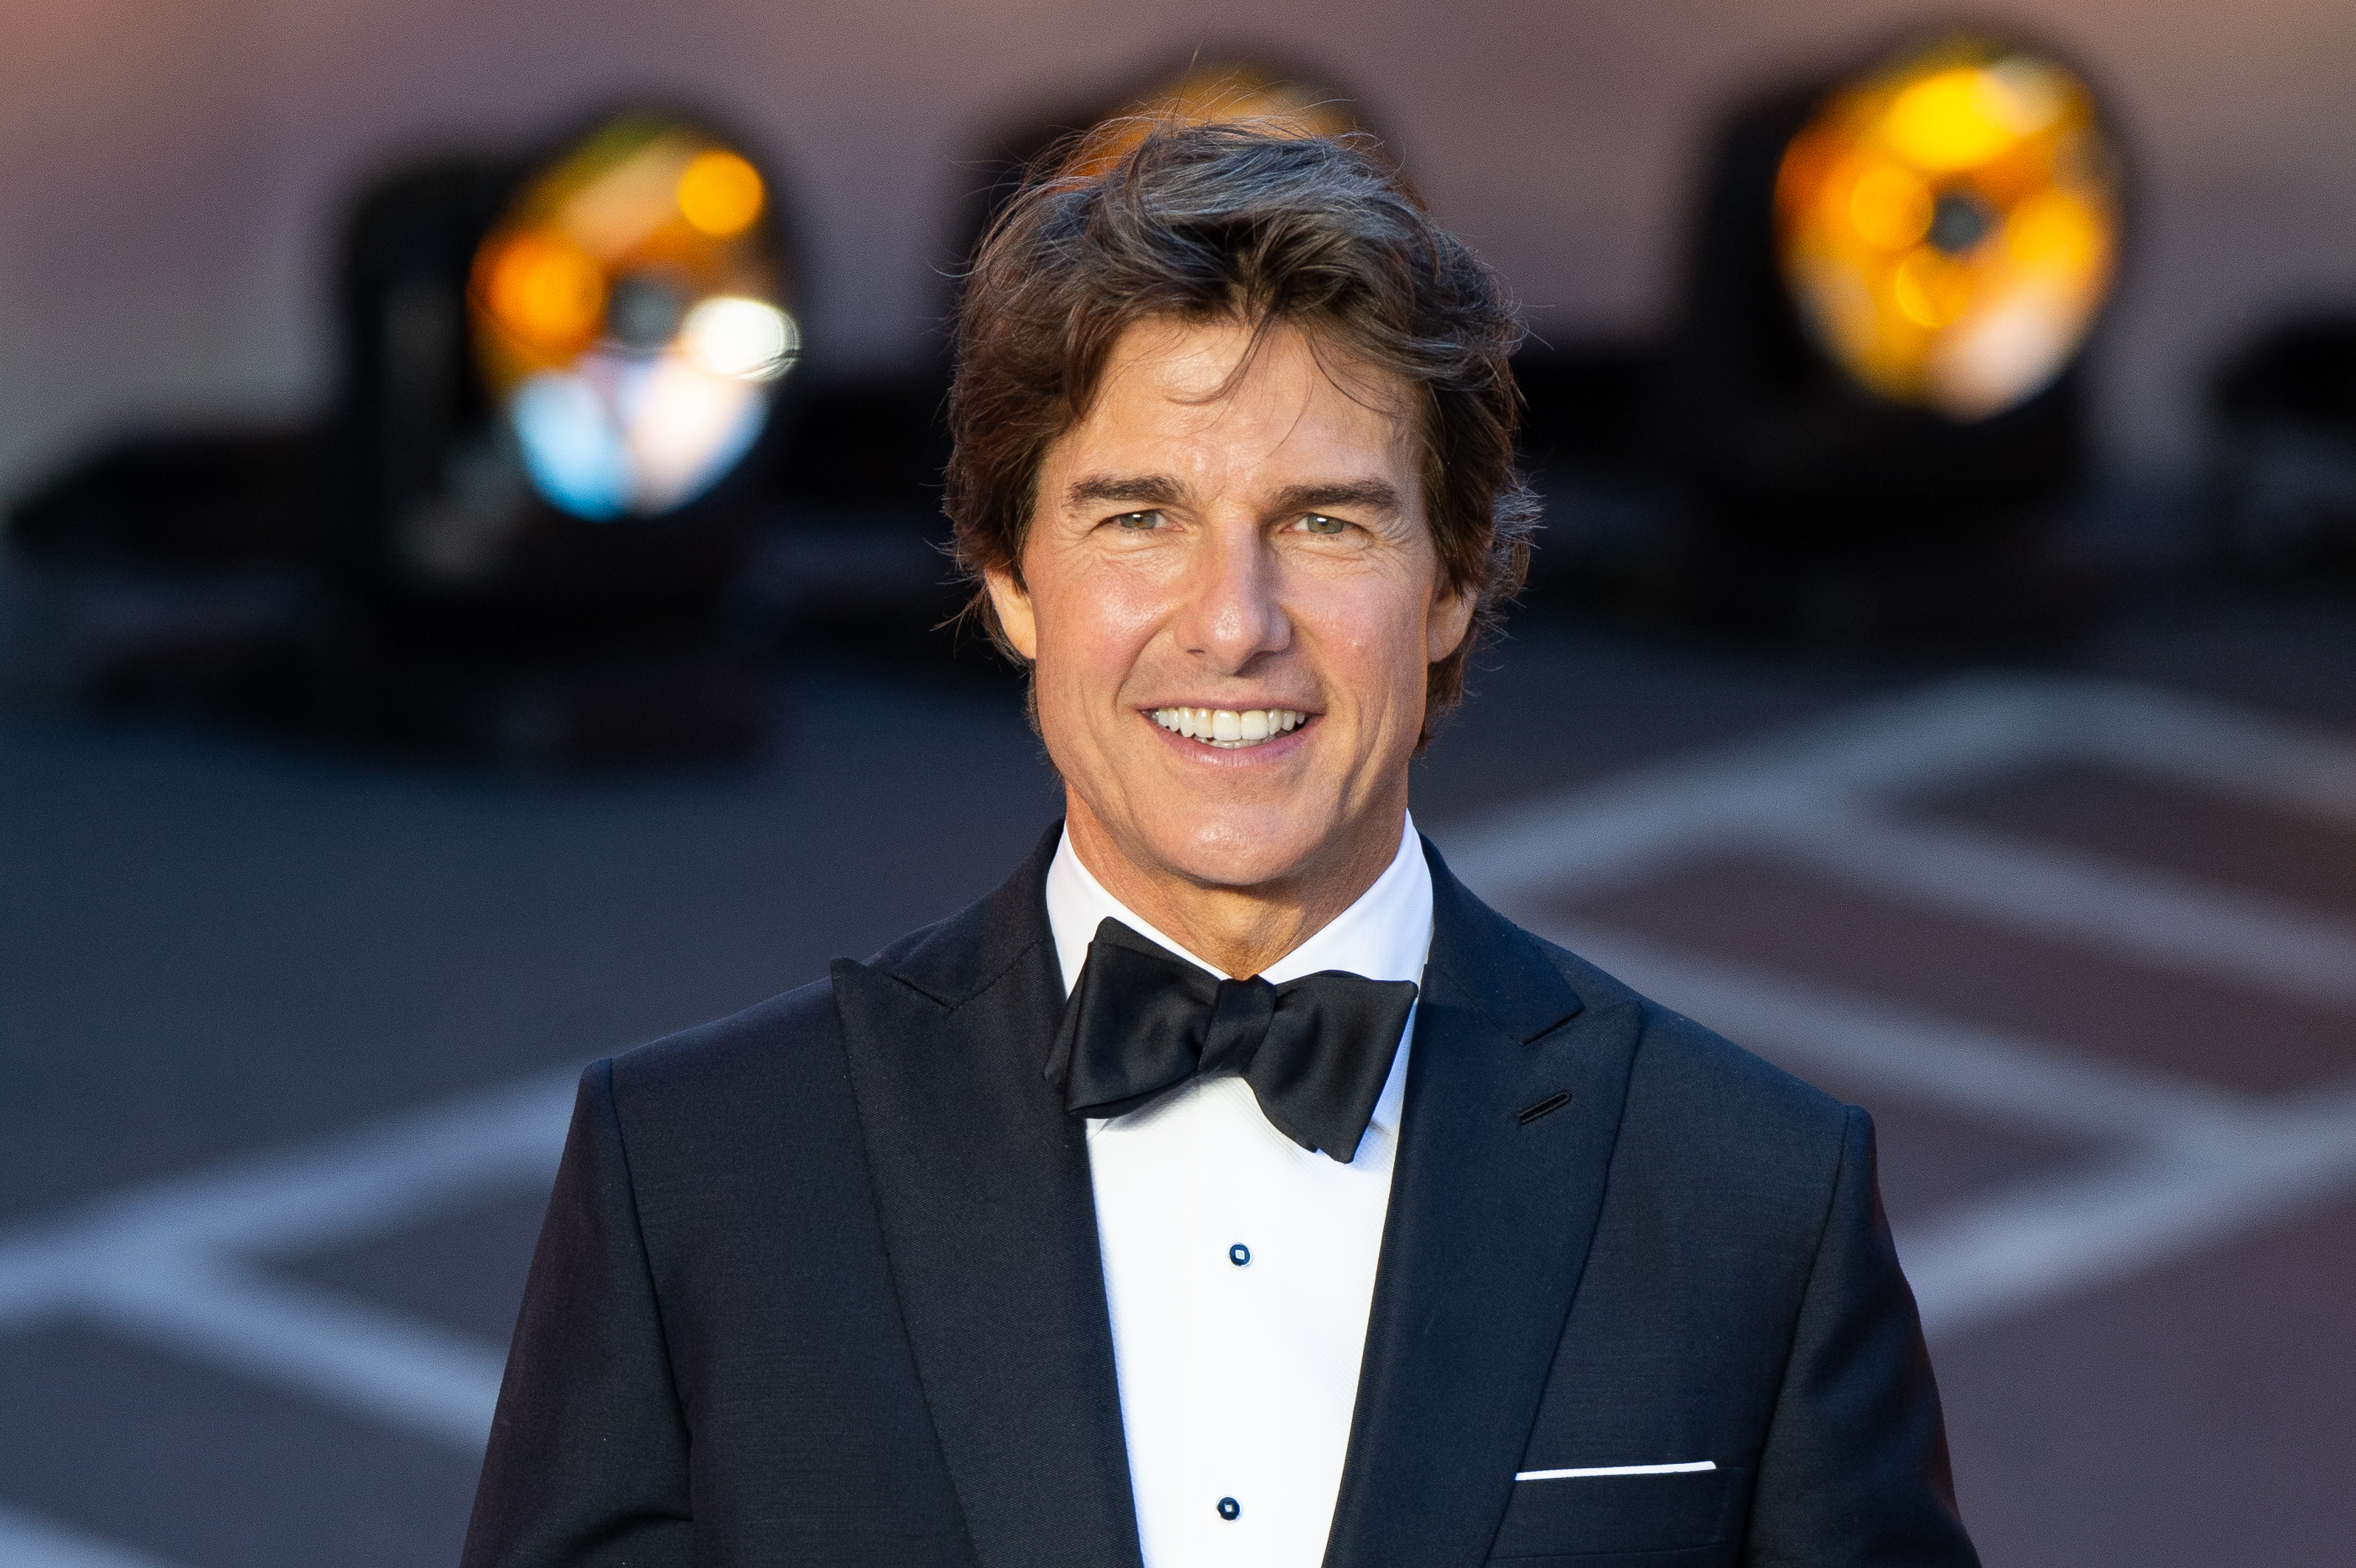 Tom Cruise smiles while wearing a black tuxedo and bow tie at an event